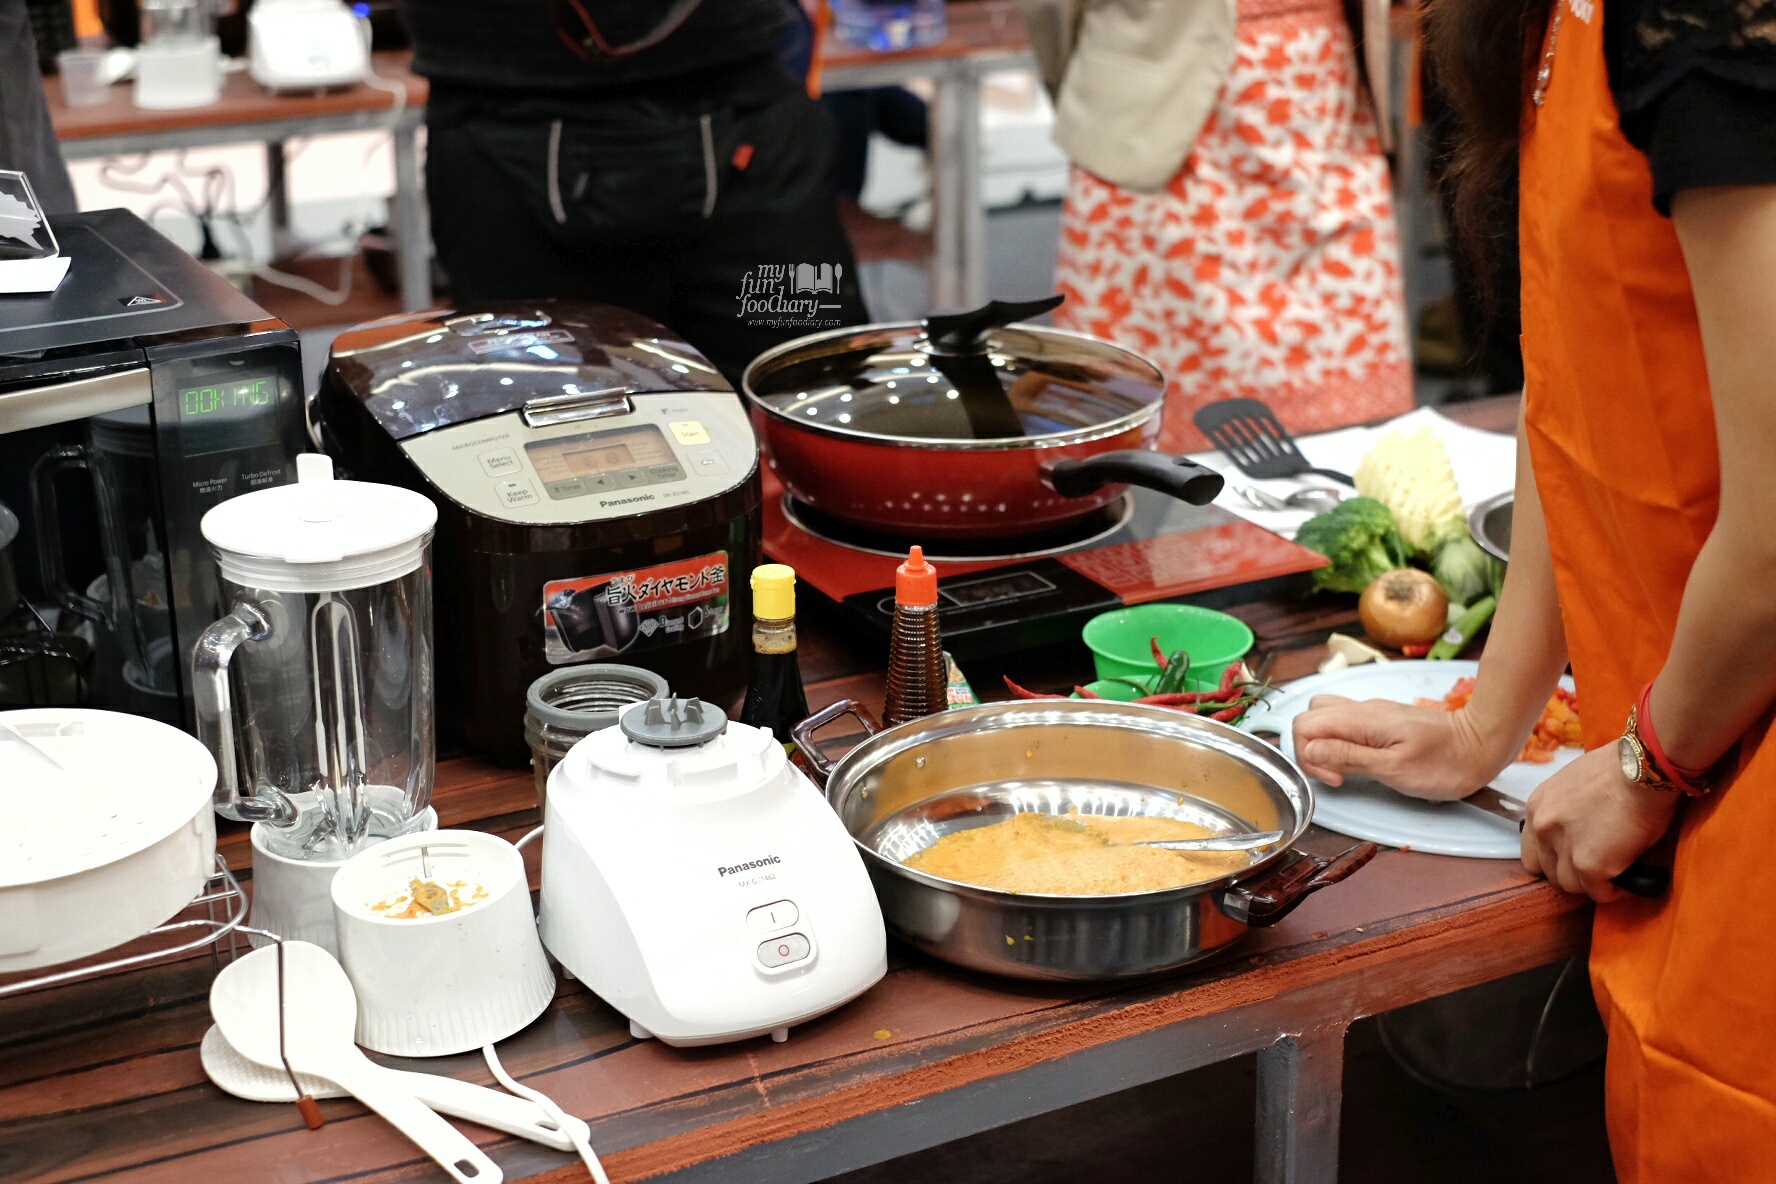 Behind the scene Cooking Competition by Myfunfoodiary 02